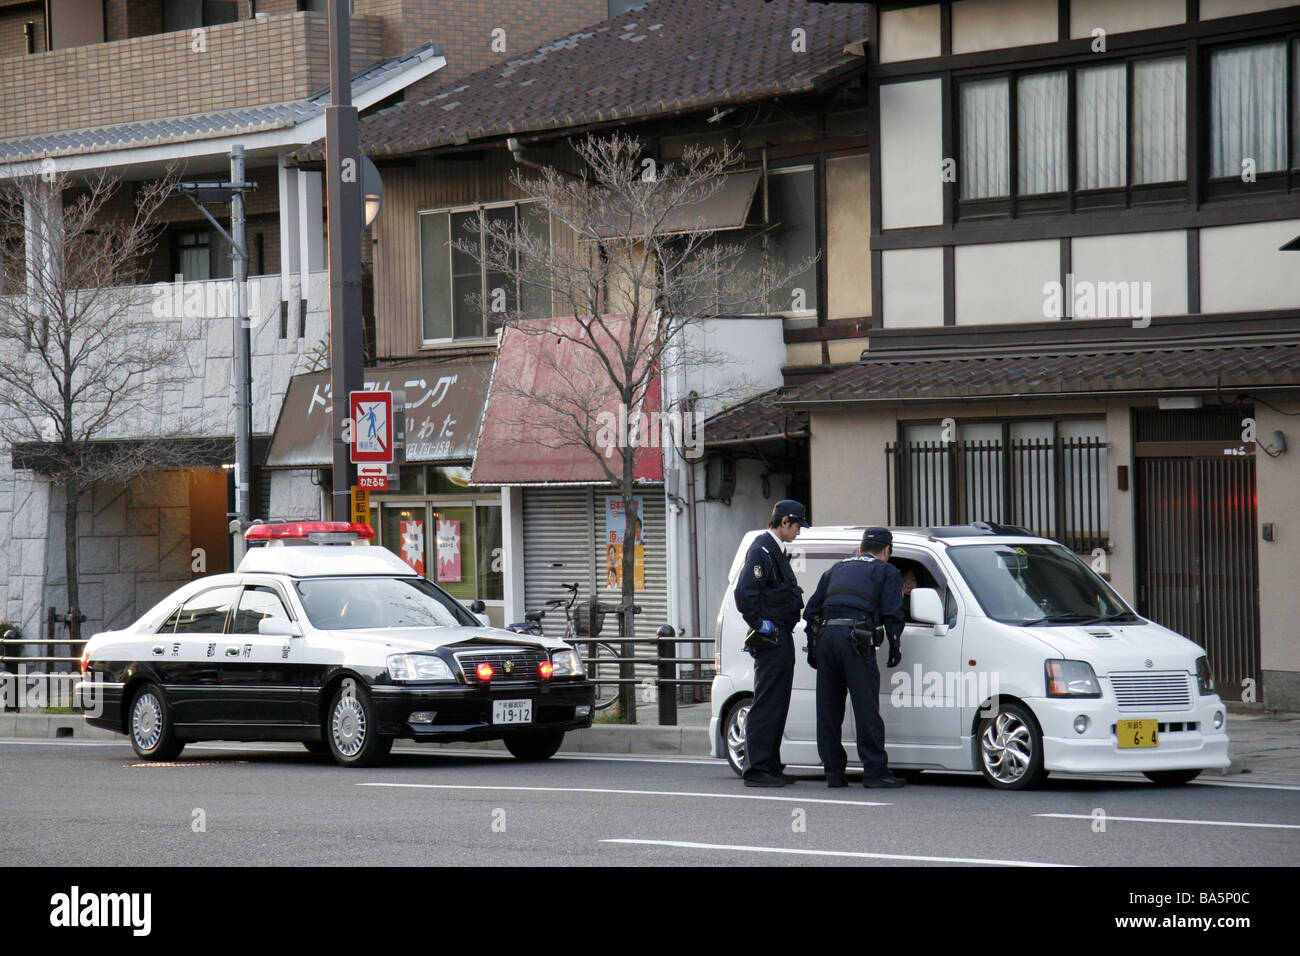 Japanese police officers talking to the driver of a car in Kyoto Japan Stock Photo